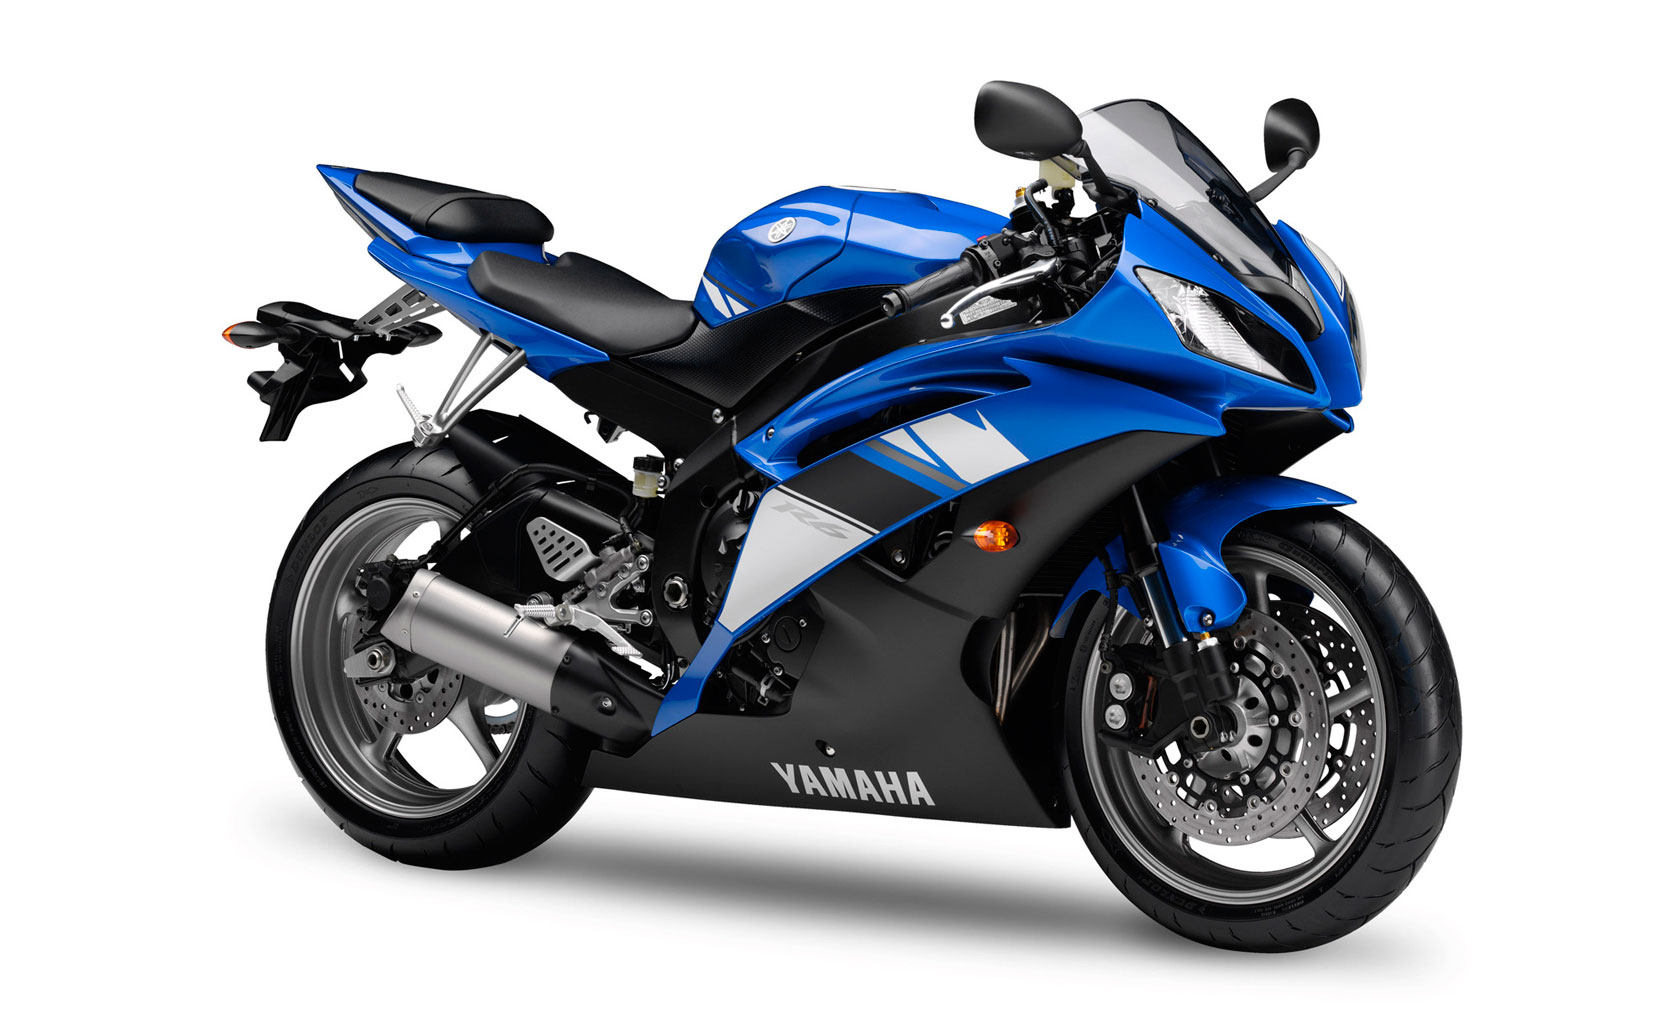 Page 7 - 2008 to 2009 - Yamaha R6/YZF-R6: Significant refinements